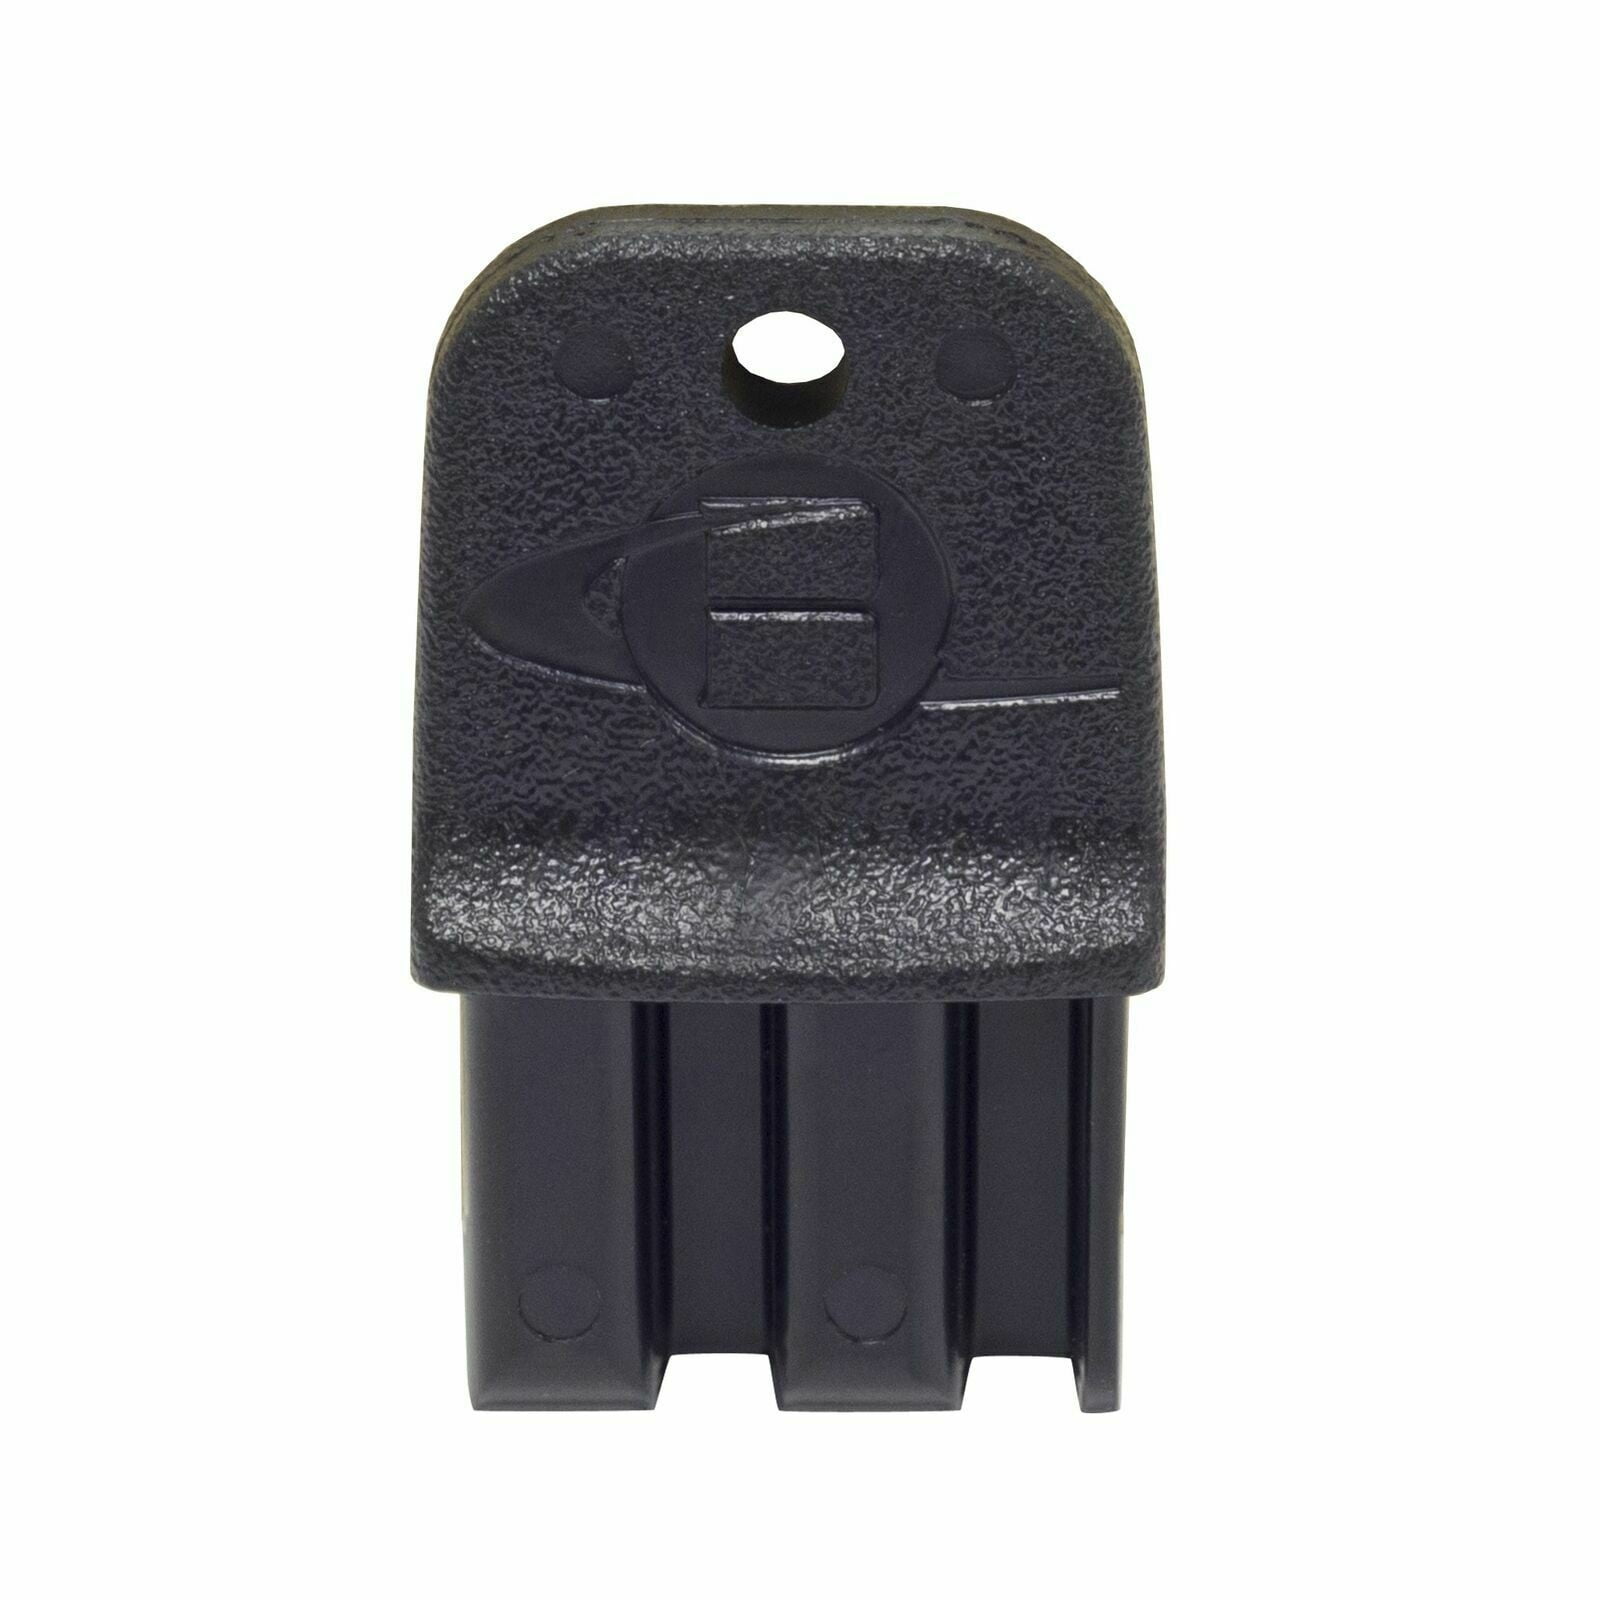 Protecta Evo Plastic PM Replacement Key for Bait Stations - 1 Key by Bell Laboratories, Size: 1 Replacement Key, Black